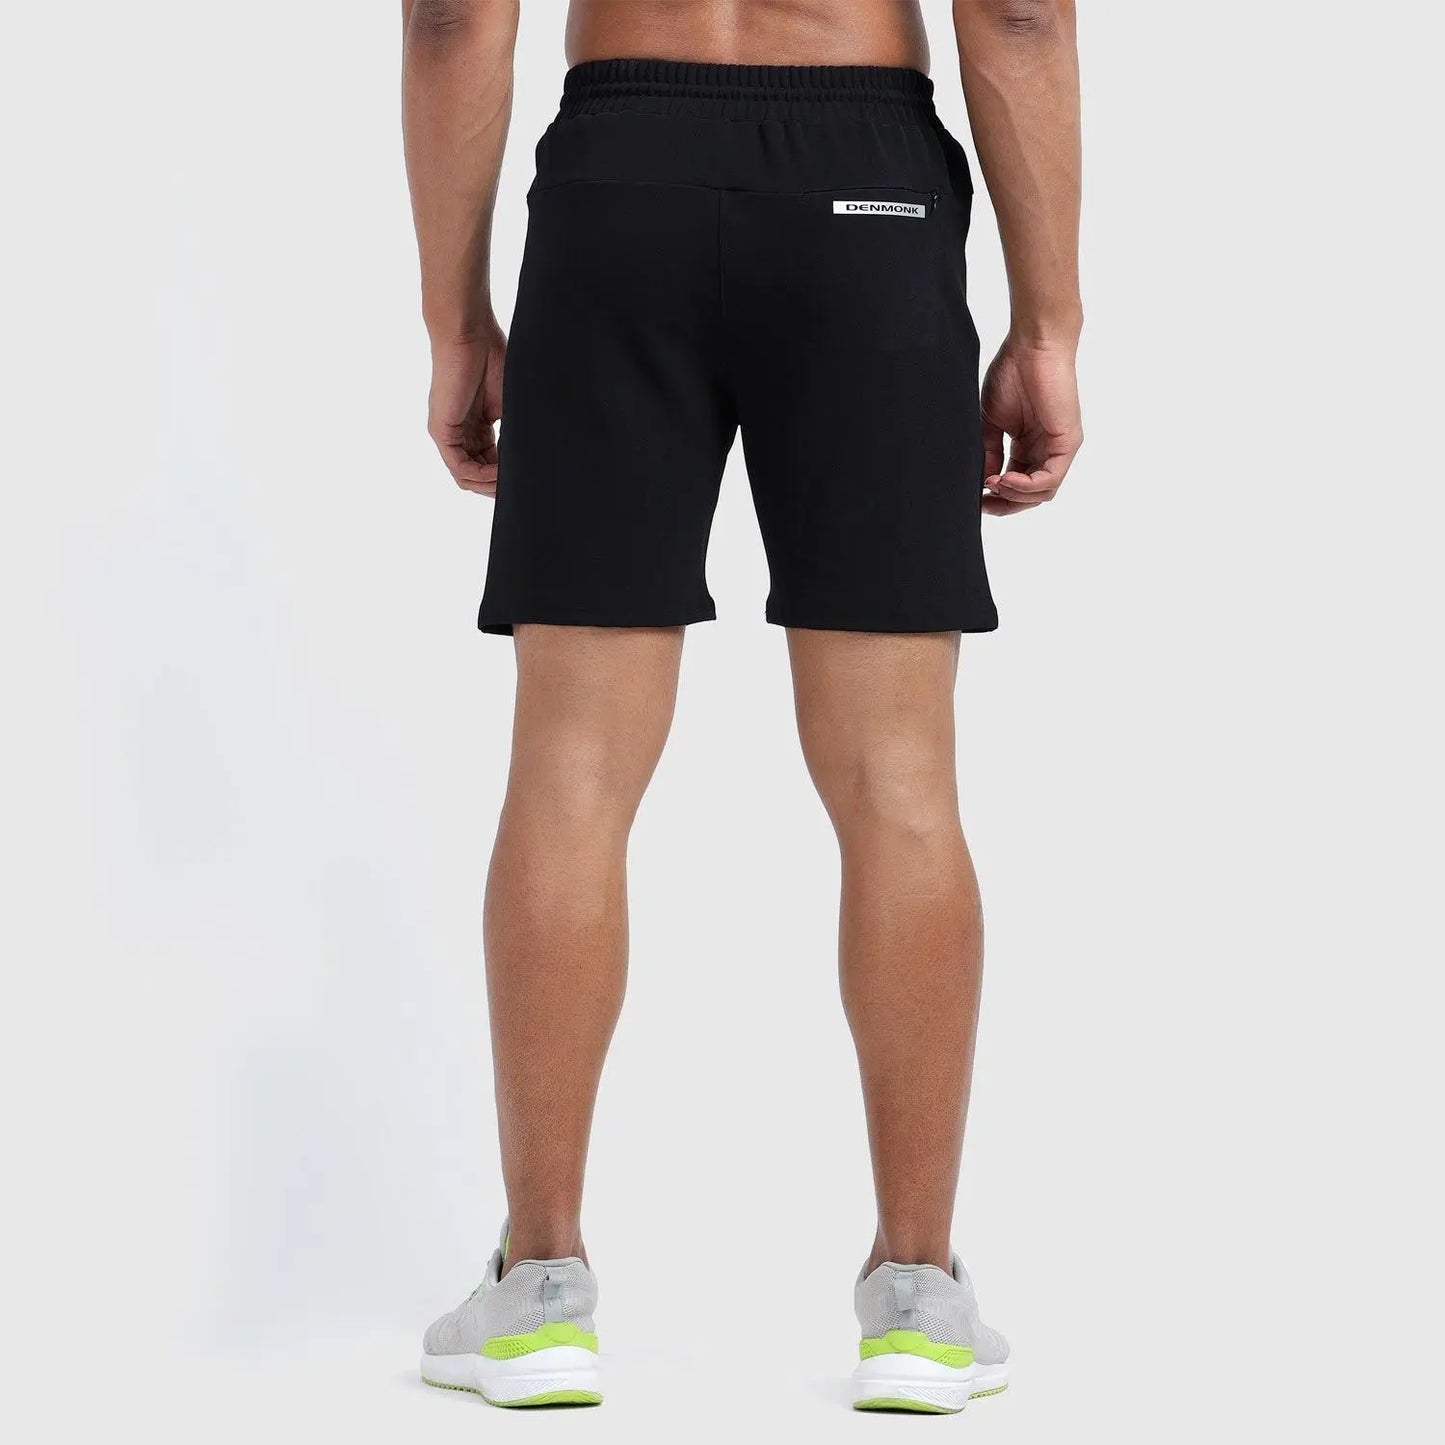 Denmonk's fashionable Retroglide Shorts black shorts for men will boost your level of gym fitness.